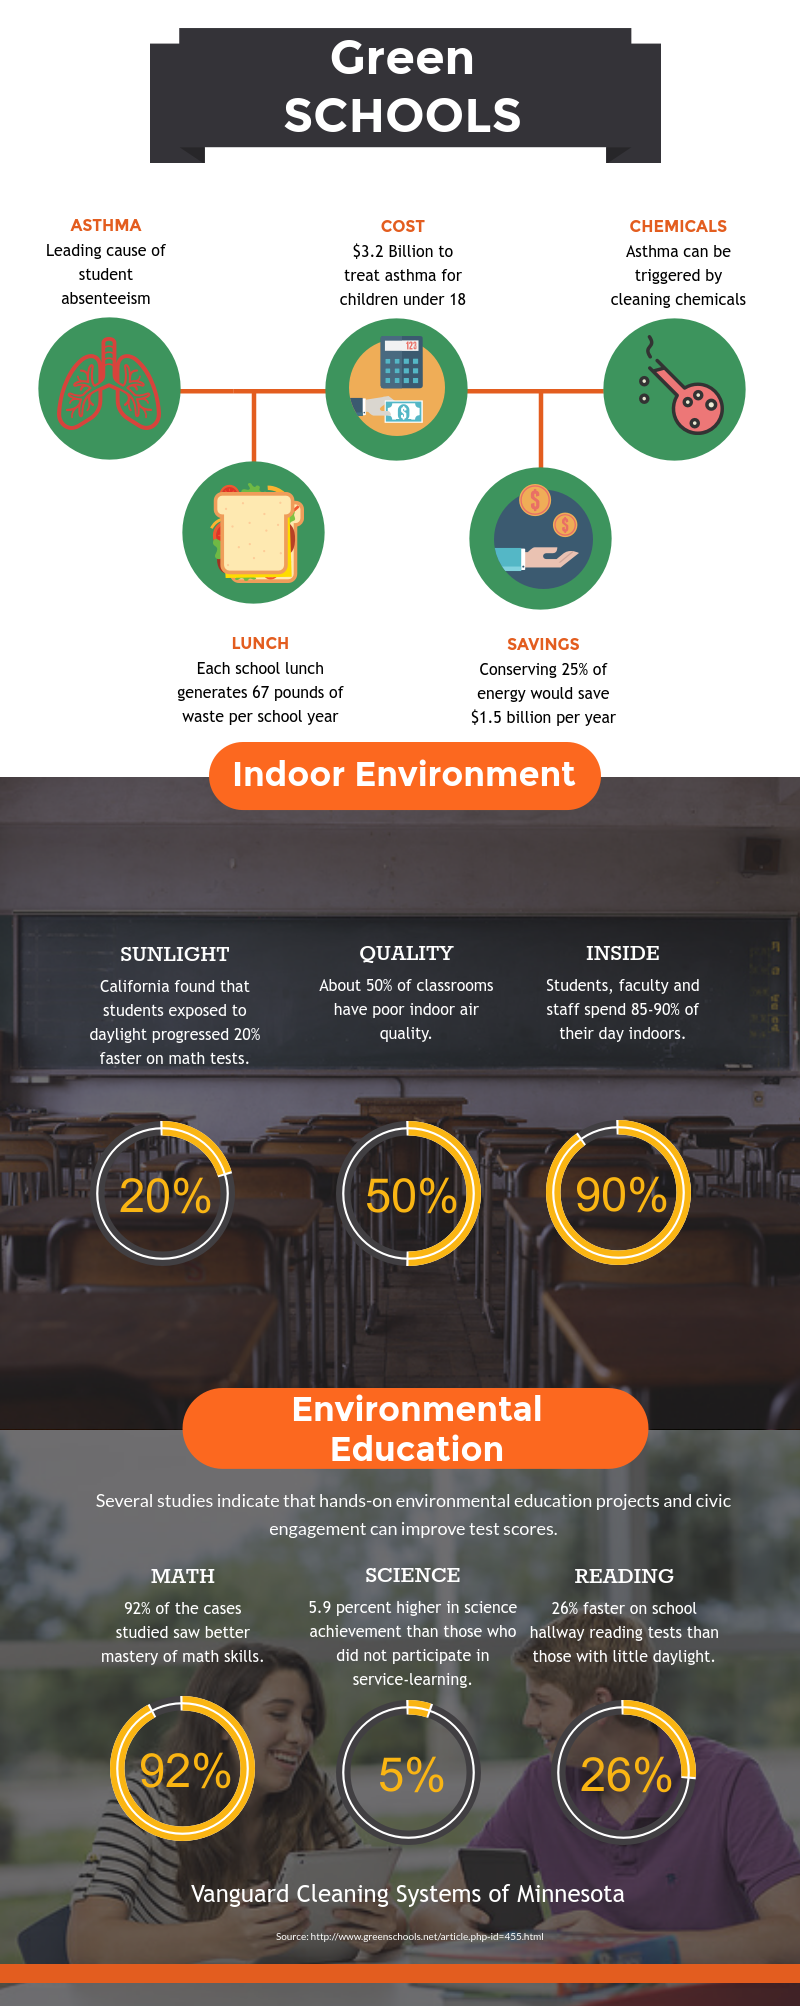 Green-Cleaning-Programs-for-Green-Schools-Infographic-1